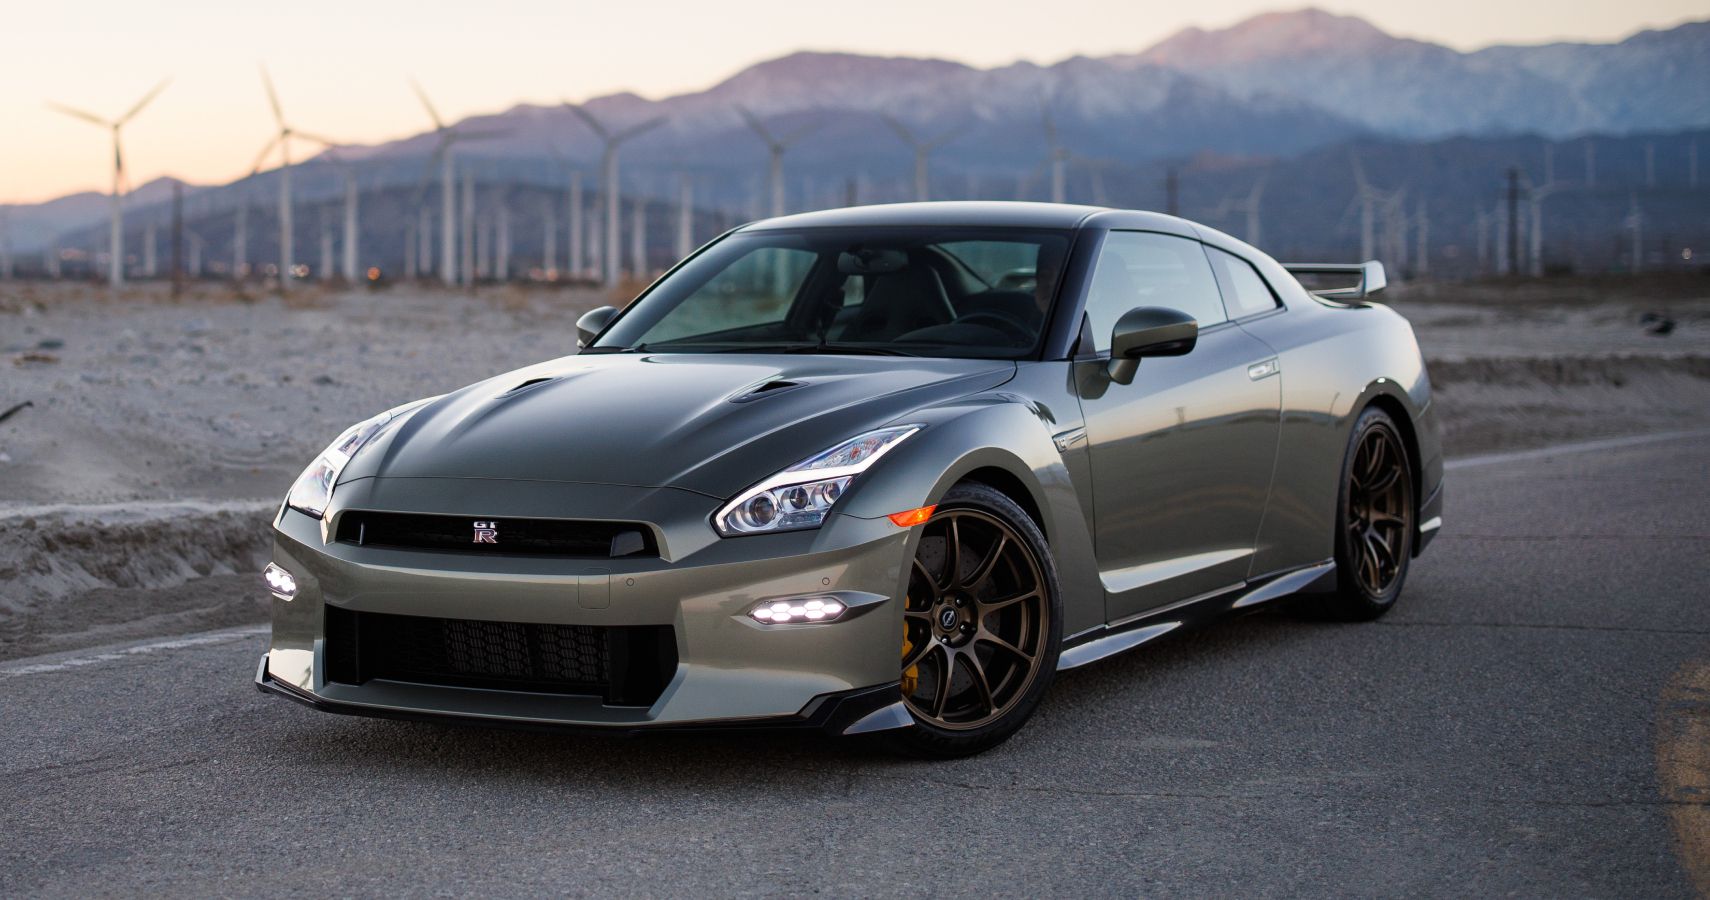 New limited-production 'T-spec' edition joins Nissan GT-R lineup